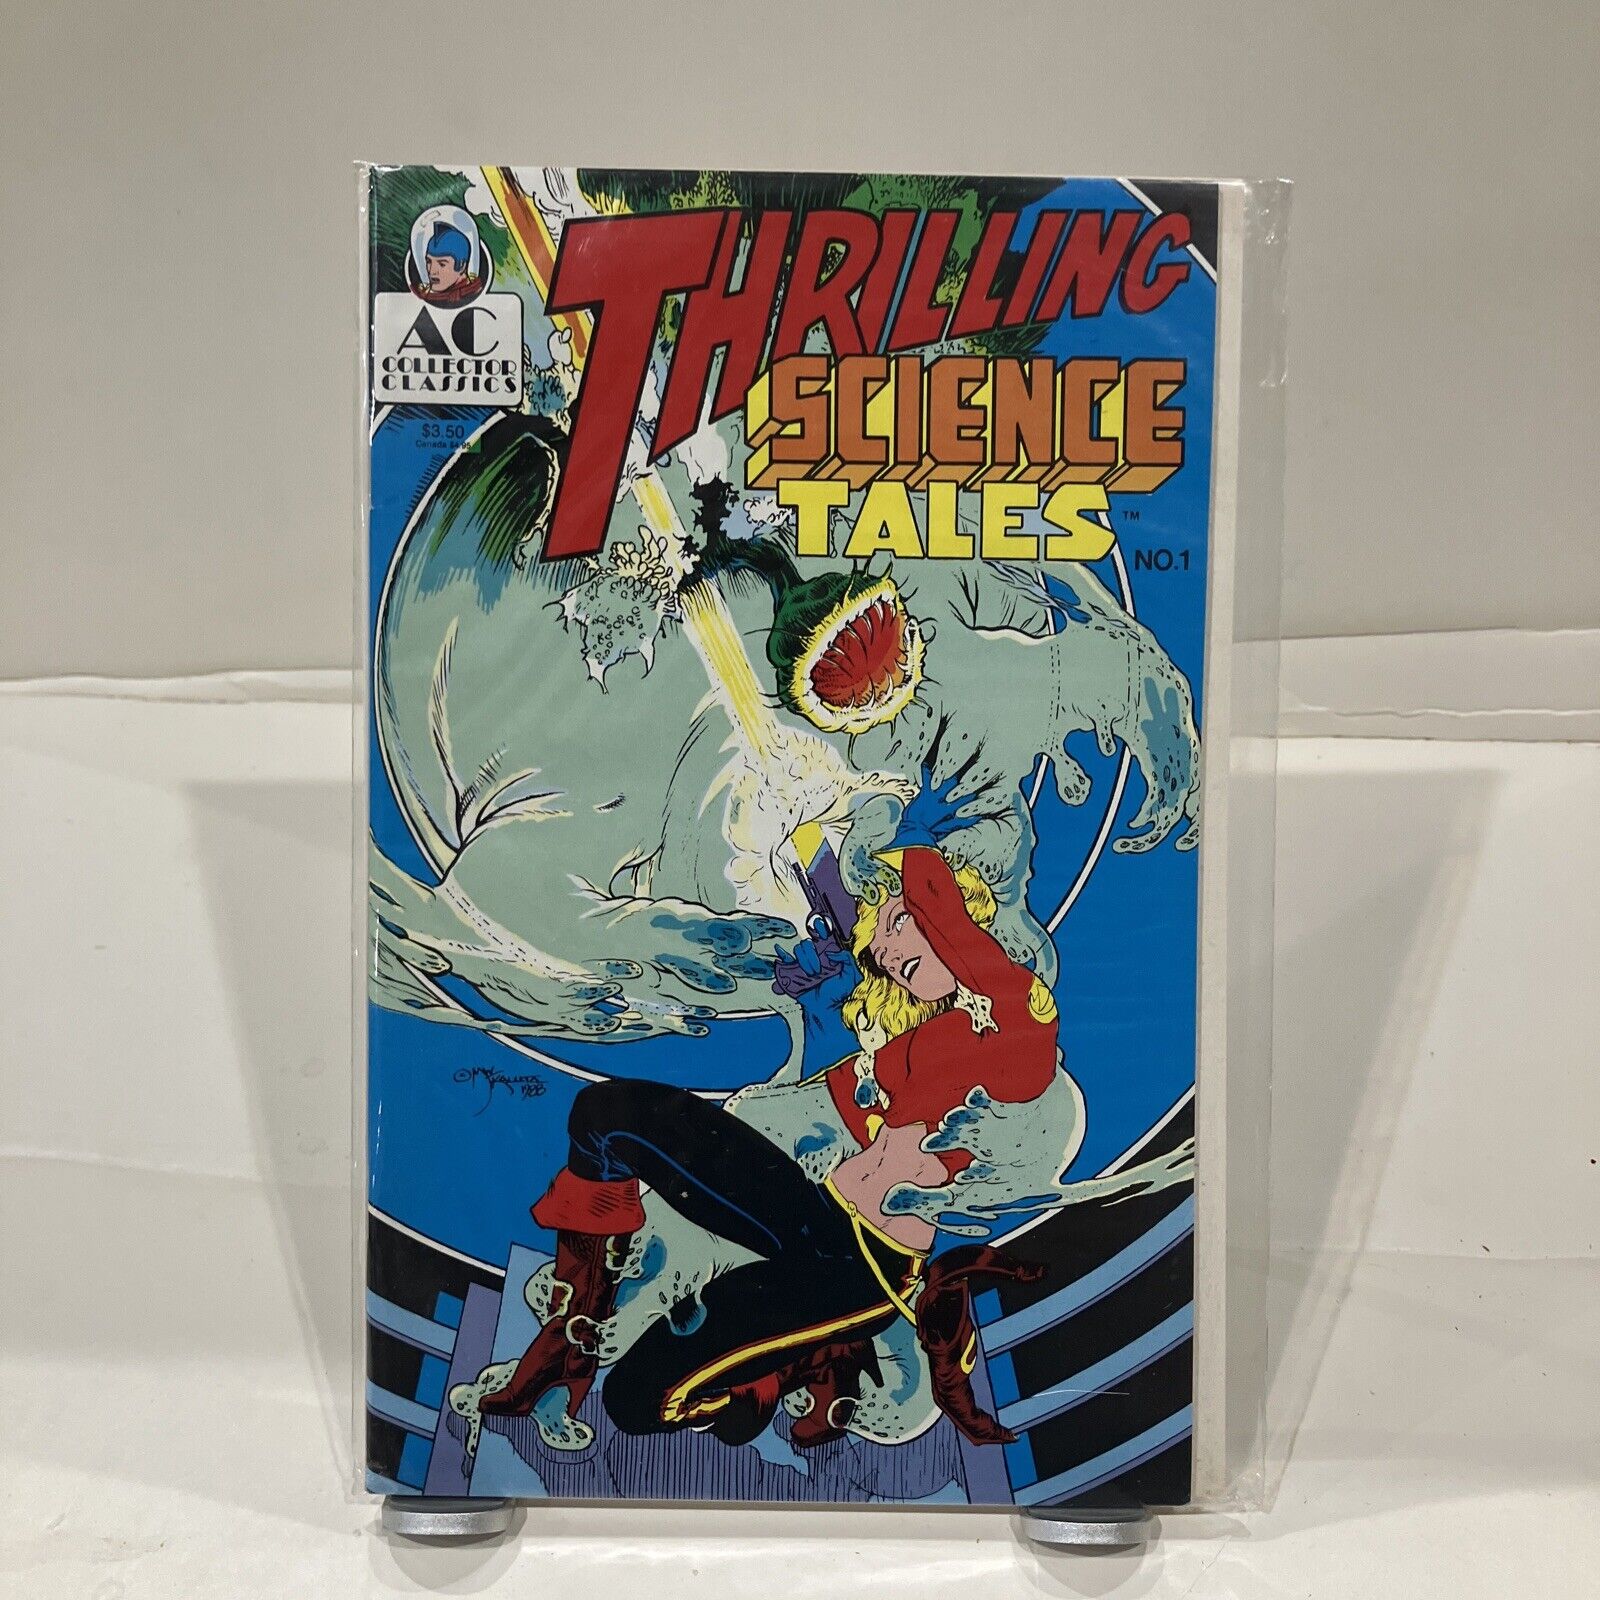 THRILLING SCIENCE TALES # 1, 1989, FC, KALUTA COVER